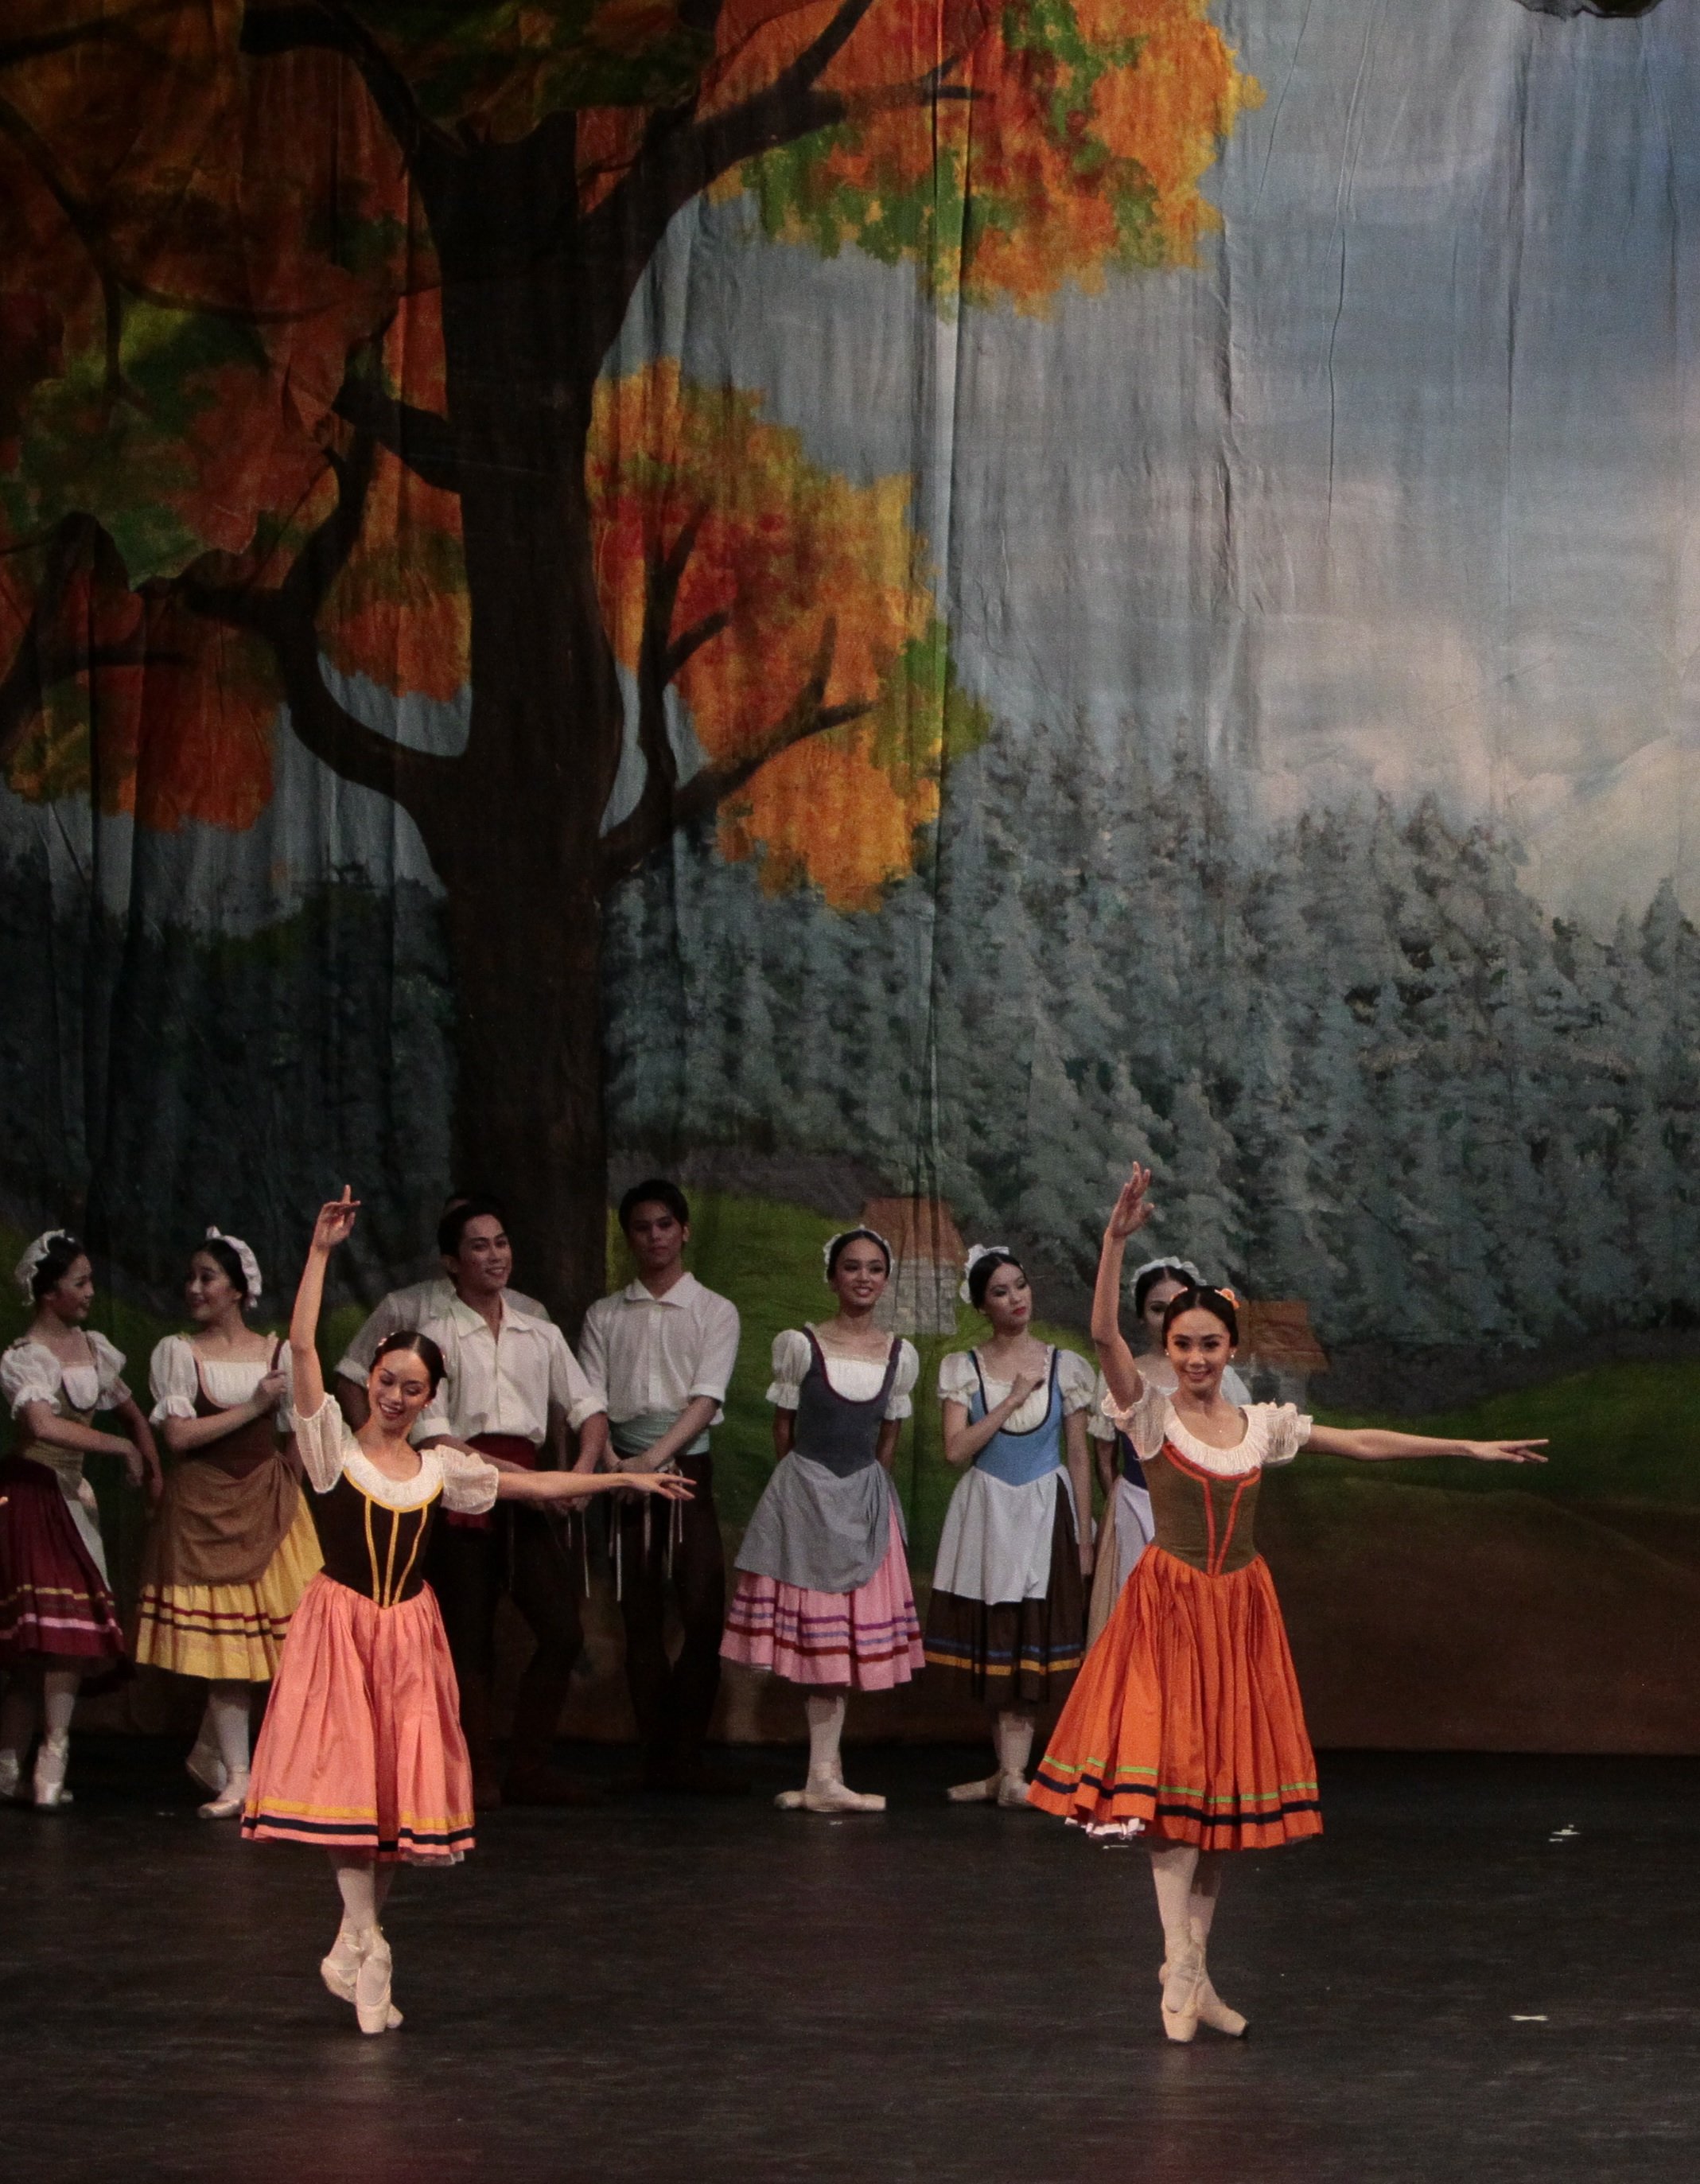    The peasant folk enjoy a village celebration in a scene from the ballet classic  Giselle  (2010). Two of Giselle’s gal pals (portrayed by Jennifer Olayvar and Zaira Cosico) coincidentally wear dresses in shades of orange, both pleasantly complemen